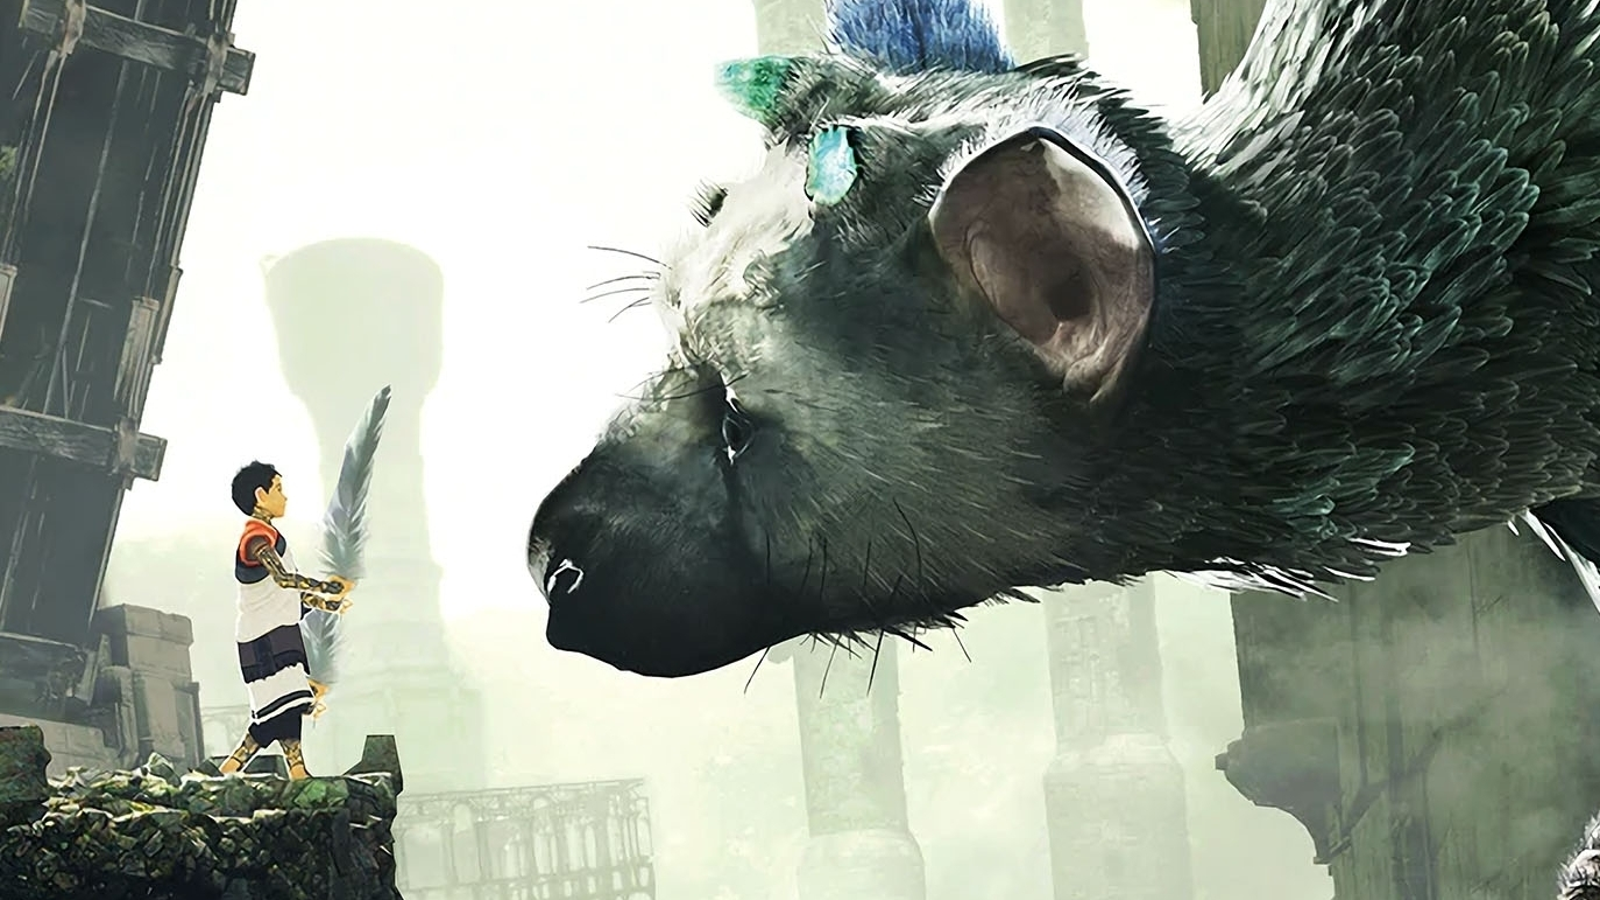 The Last Guardian shown at E3 by Sony, coming next year